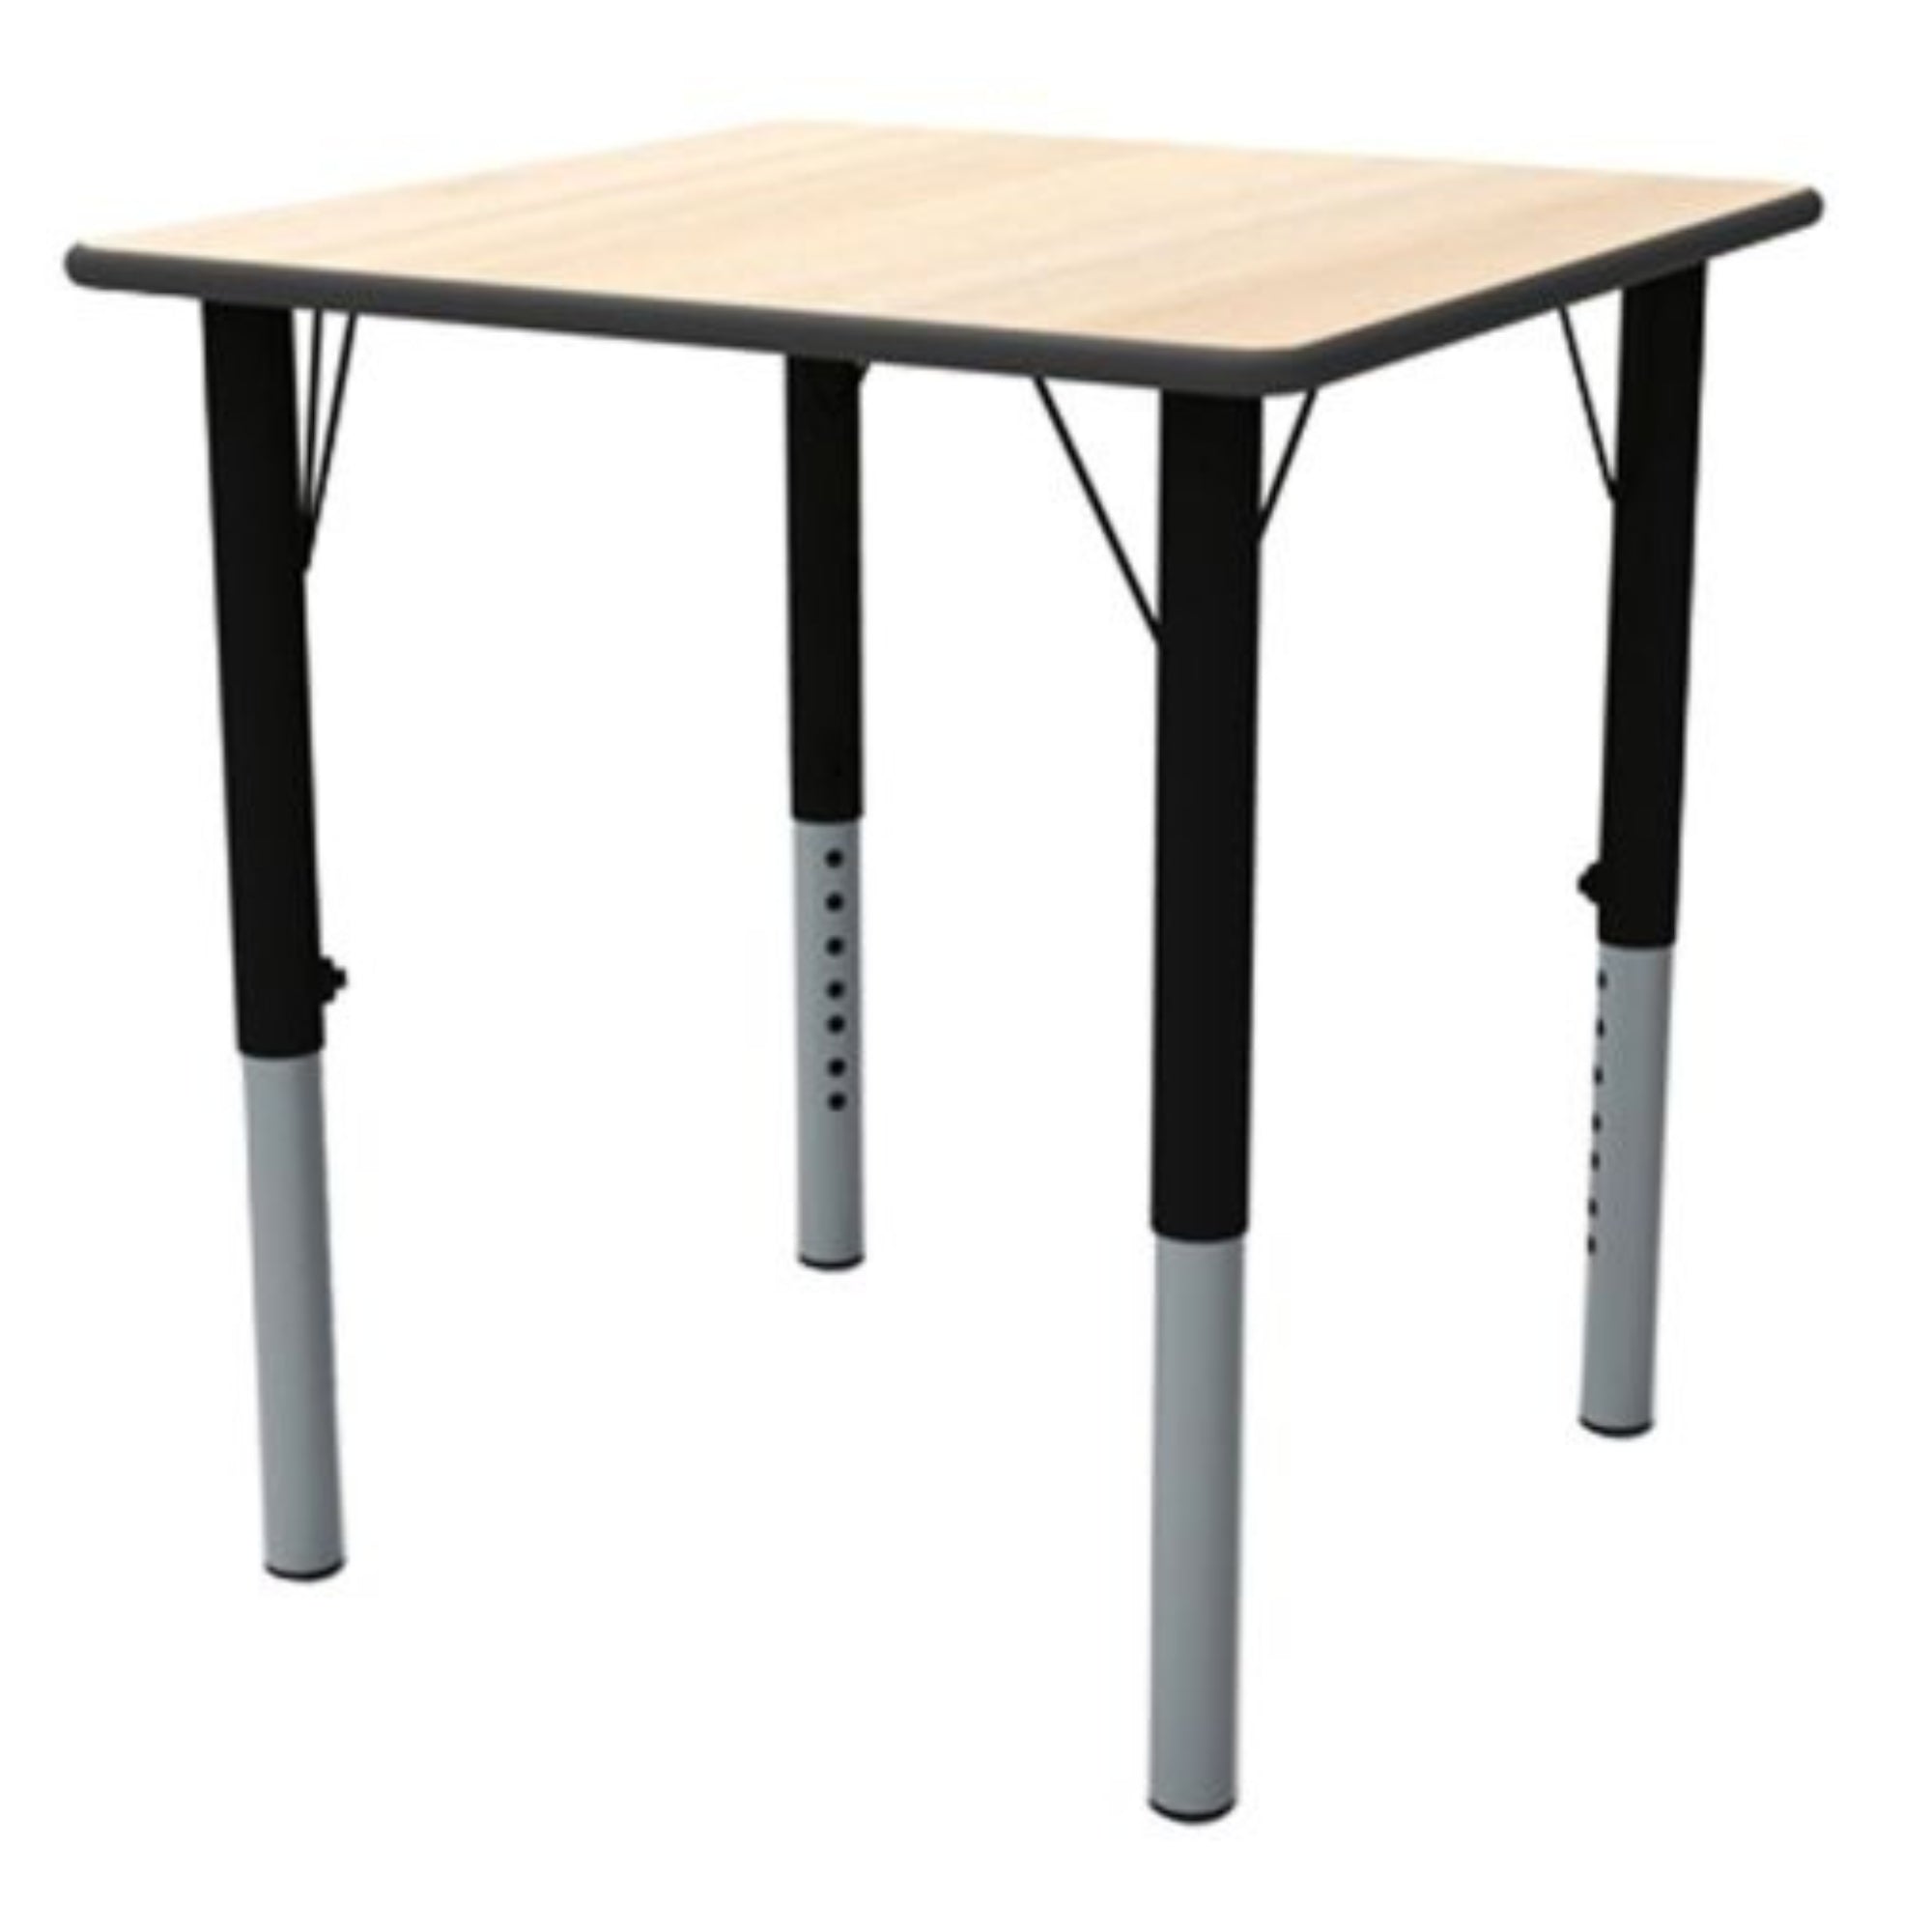 Nursery Height Adjustable Square Classroom Table, The Nursery Height Adjustable Square Classroom Table is the perfect addition to any educational environment. It allows for desks to be easily adjusted to the ideal height for each age group, ensuring a comfortable and ergonomic workspace. This table is proudly manufactured in the UK, using high-quality materials that are built to last. The 25mm thick MFC top with PVC edge is both hard-wearing and durable, while the rounded corners ensure safety. The steel po